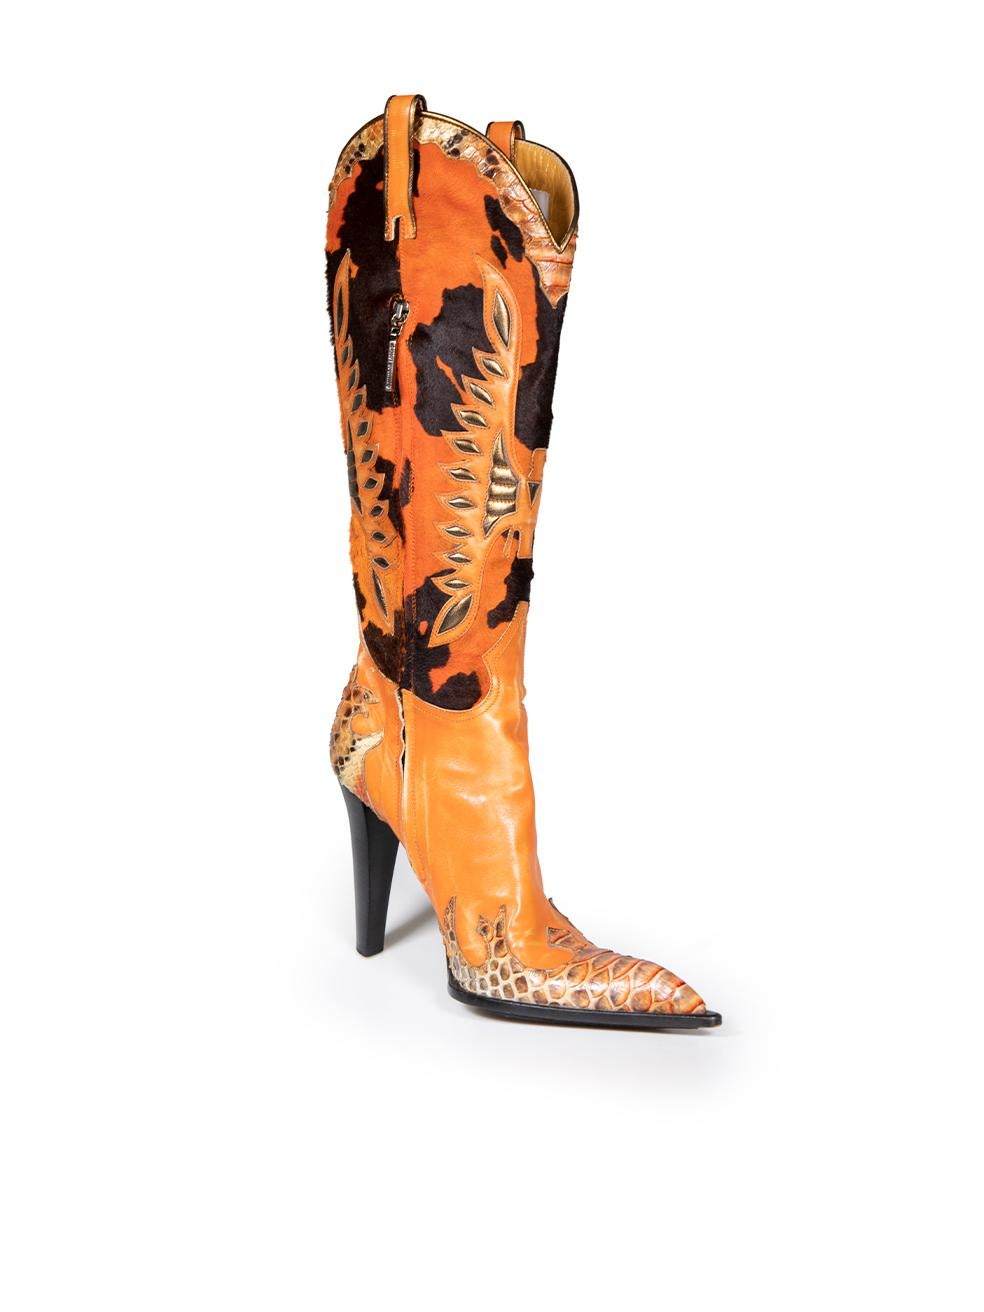 CONDITION is Good. Minor wear to boots is evident. Light abrasions to the leather and some peeling to the python leather on this used Gianmarco Lorenzi designer resale item.
 
 
 
 Details
 
 
 Orange
 
 Pony hair
 
 Cowboy boots
 
 Python and